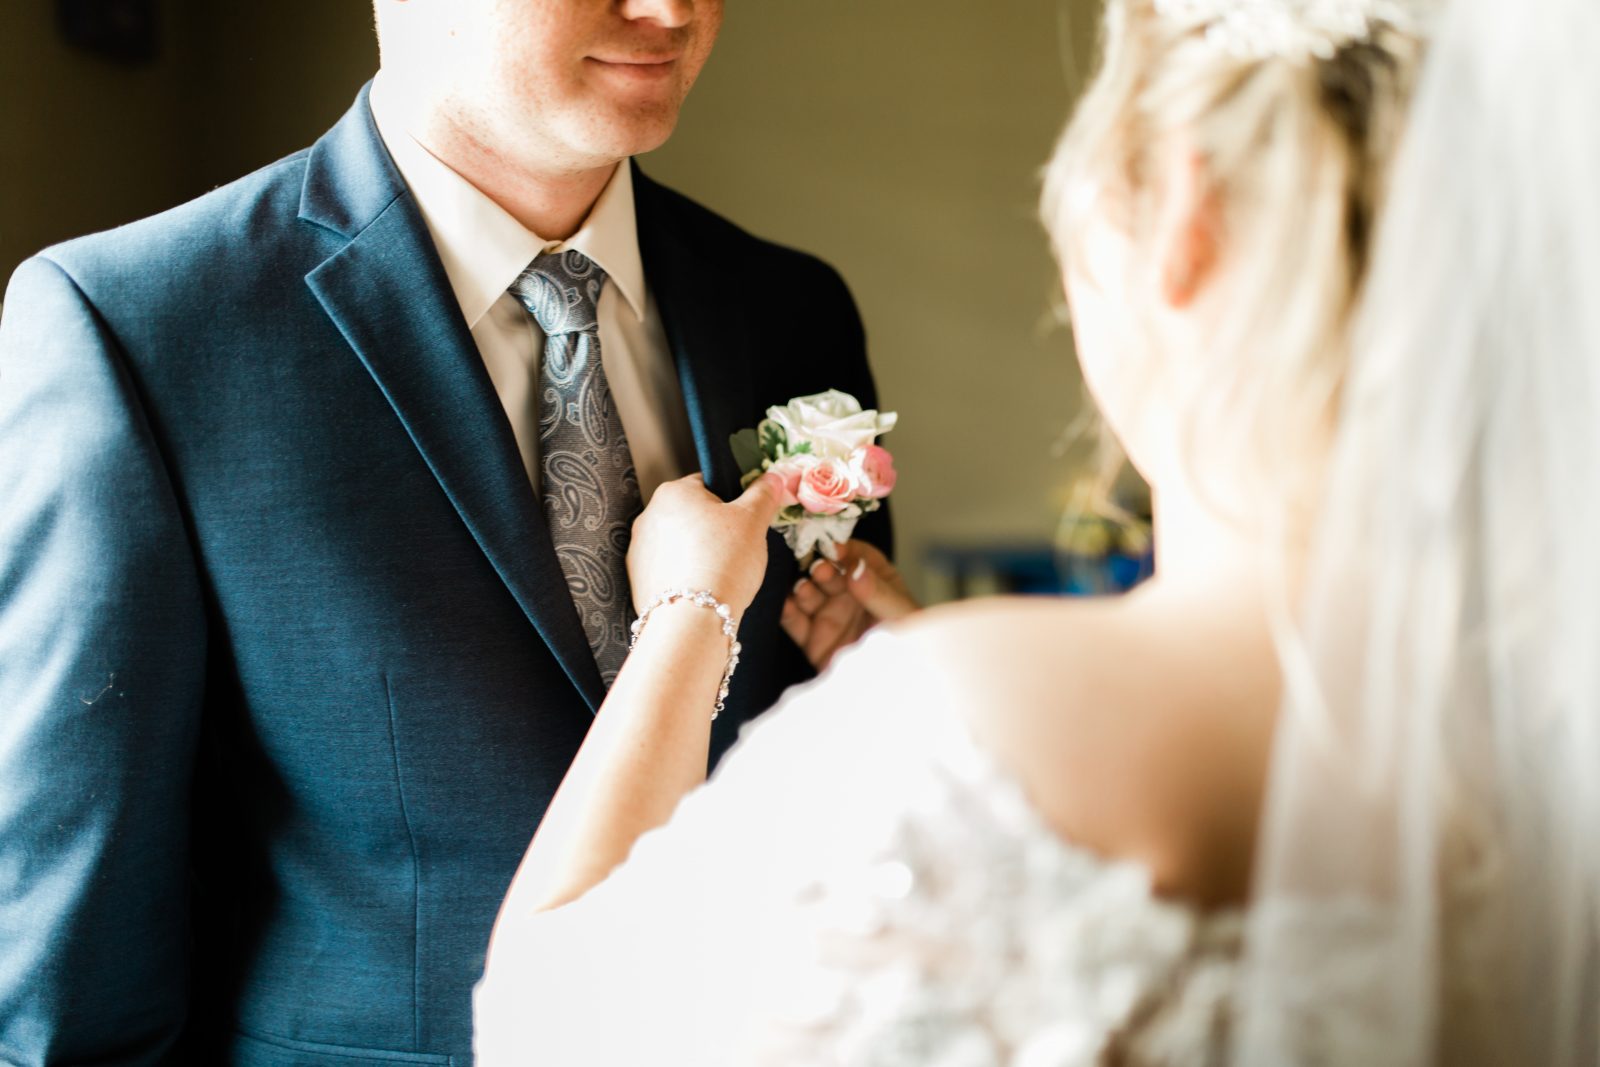 bride pinning the boutonniere on the groom's blue suit